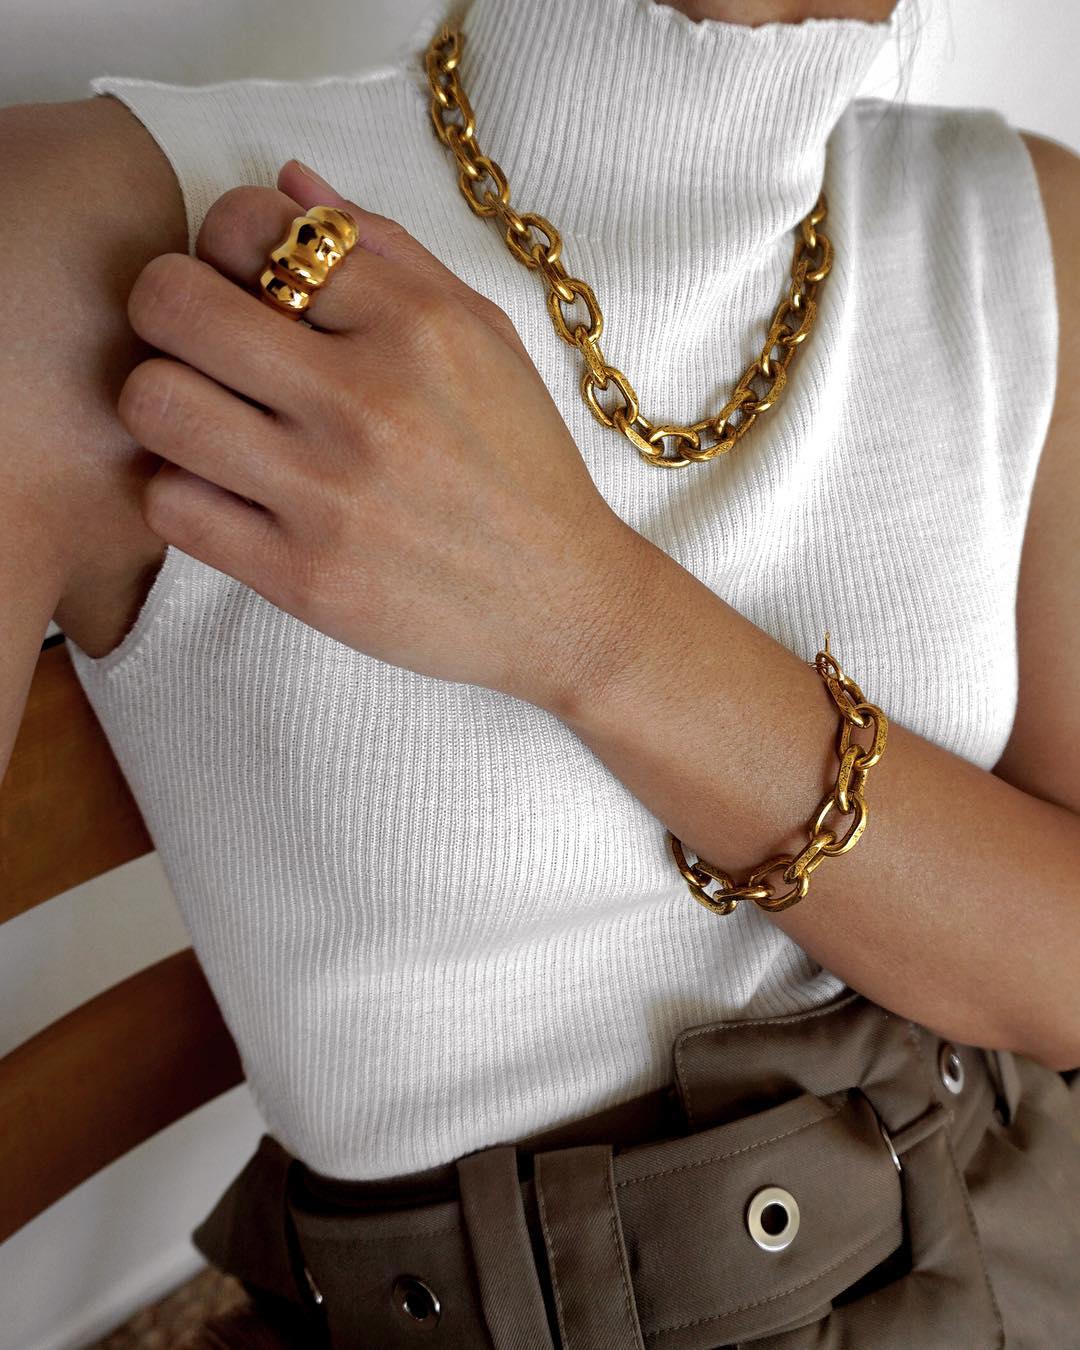 Bold Gold Jewelry is Trending - Blank Itinerary